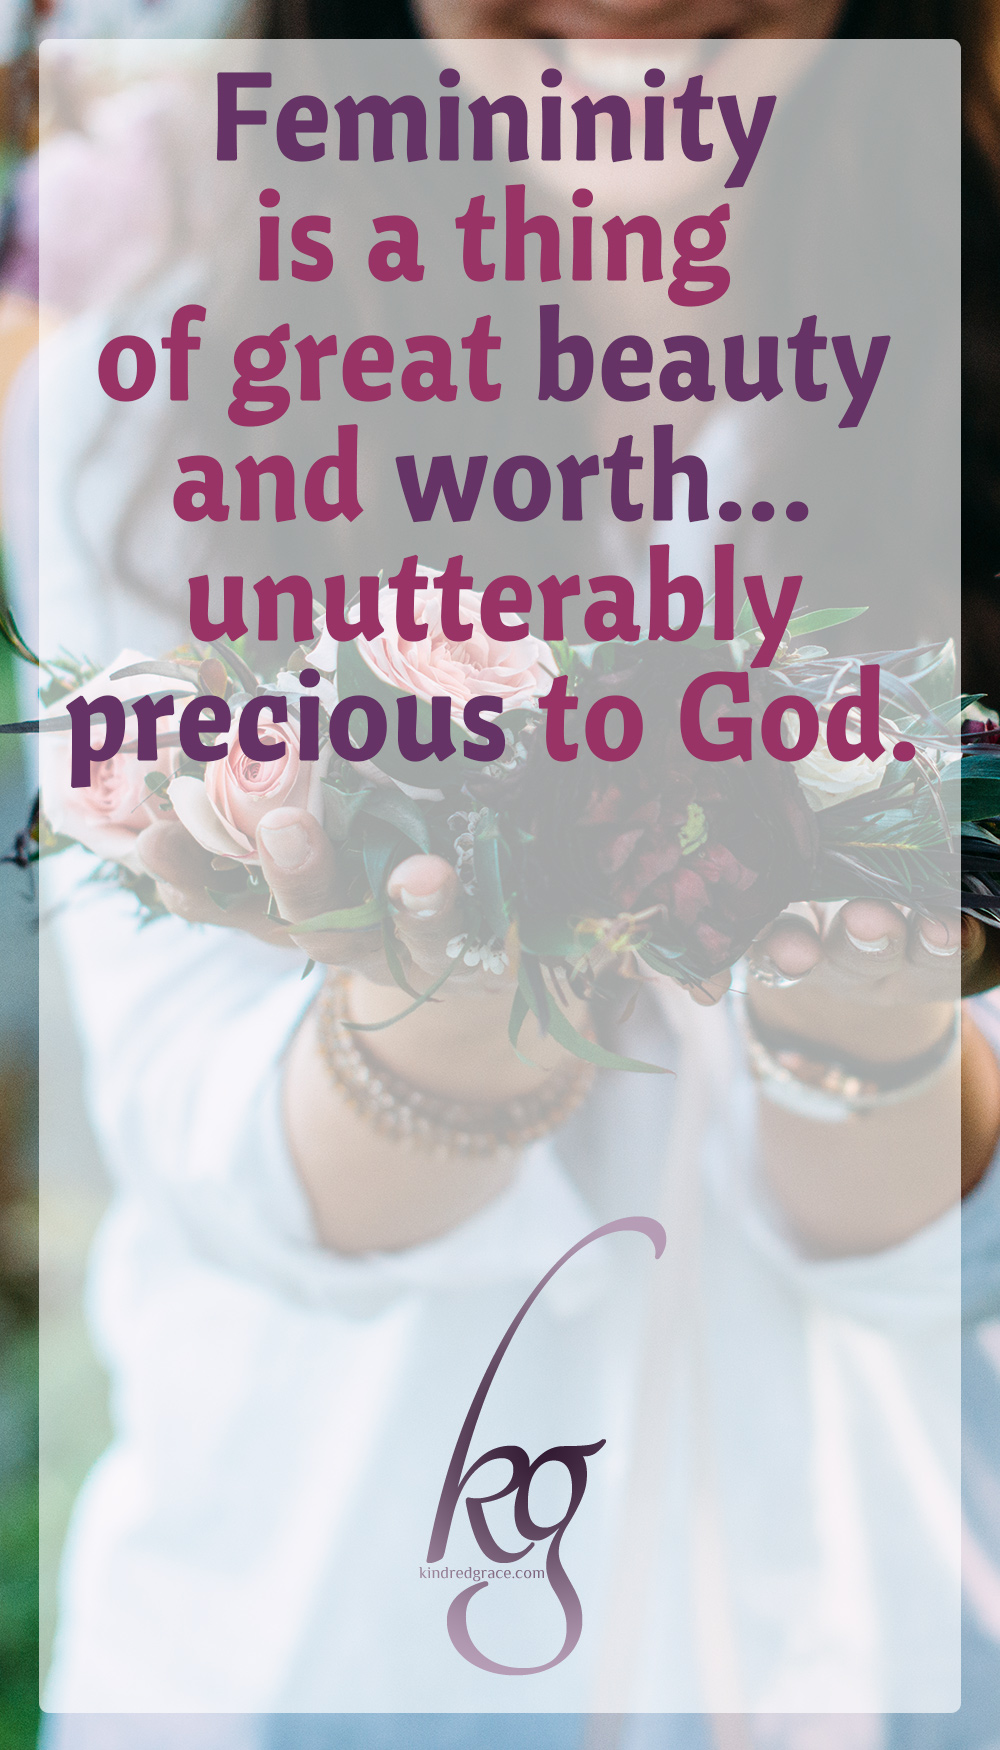 Femininity is a thing of great beauty and worth, valuable and inspiring to the men in your life, edifying and ennobling to the women coming behind you, and most of all, unutterably precious to God. via @KindredGrace